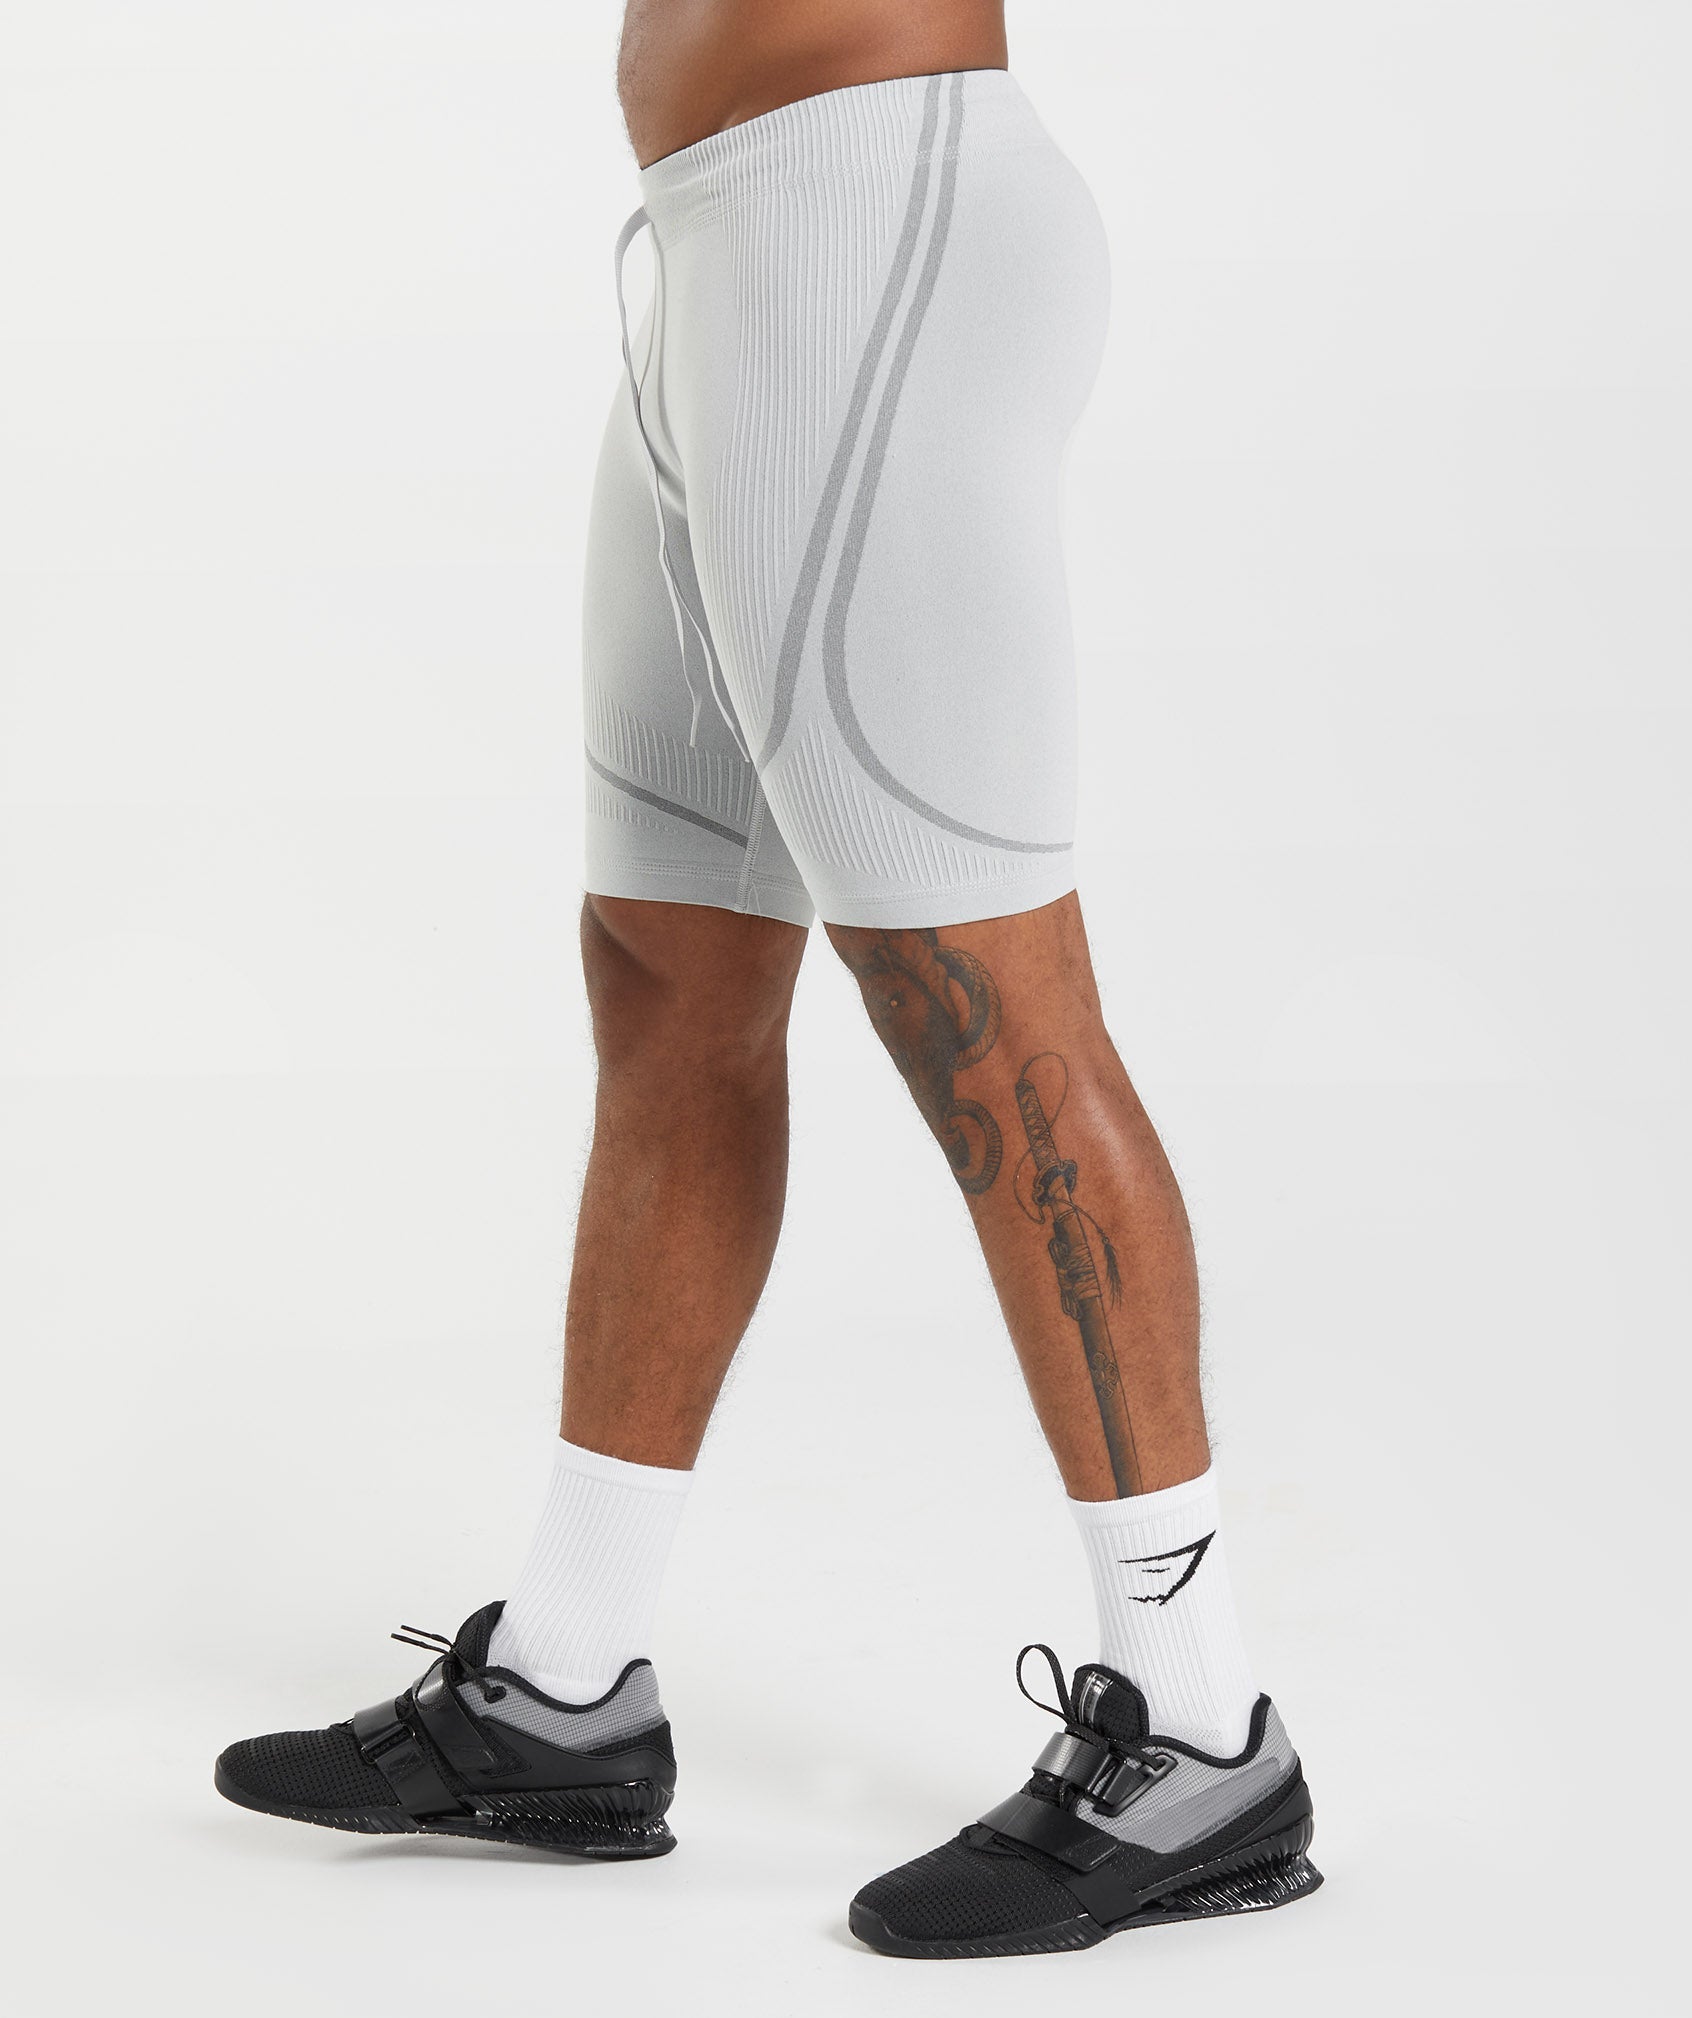 315 Seamless 1/2 Shorts in Light Grey/Charcoal Grey - view 3